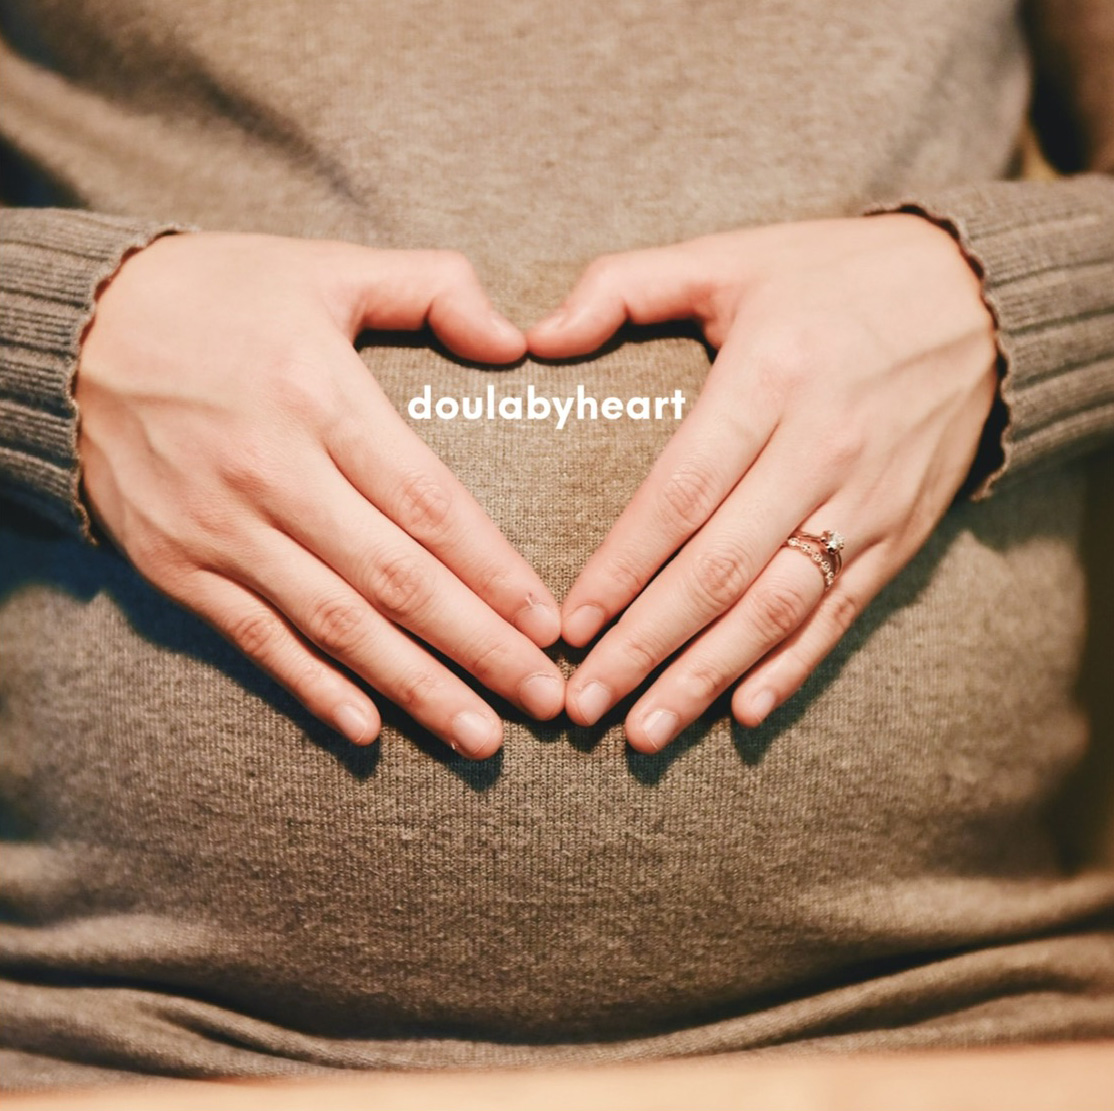 Doula by Heart